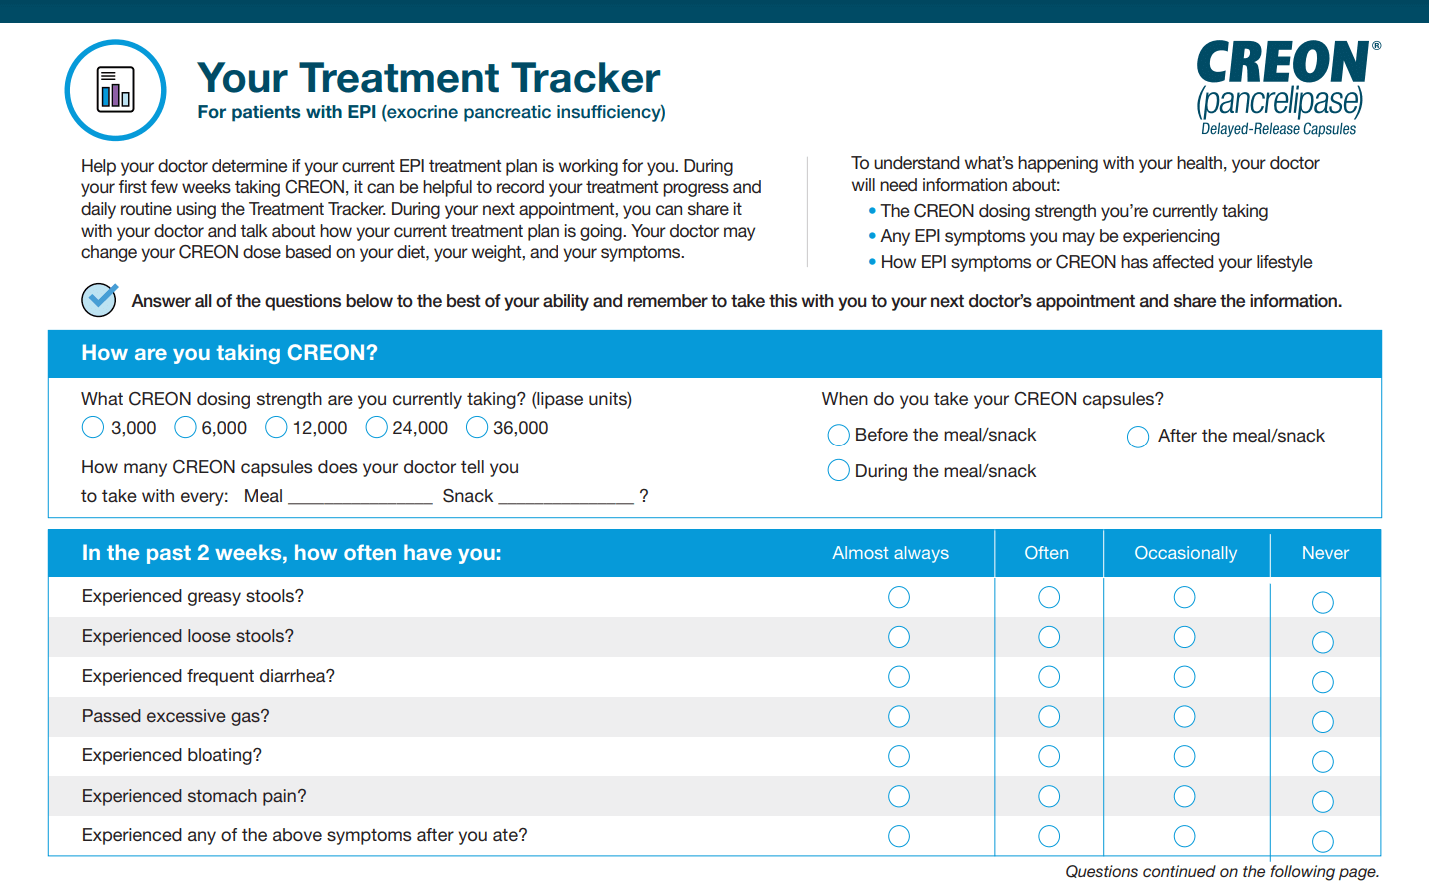 Your Treatment Tracker